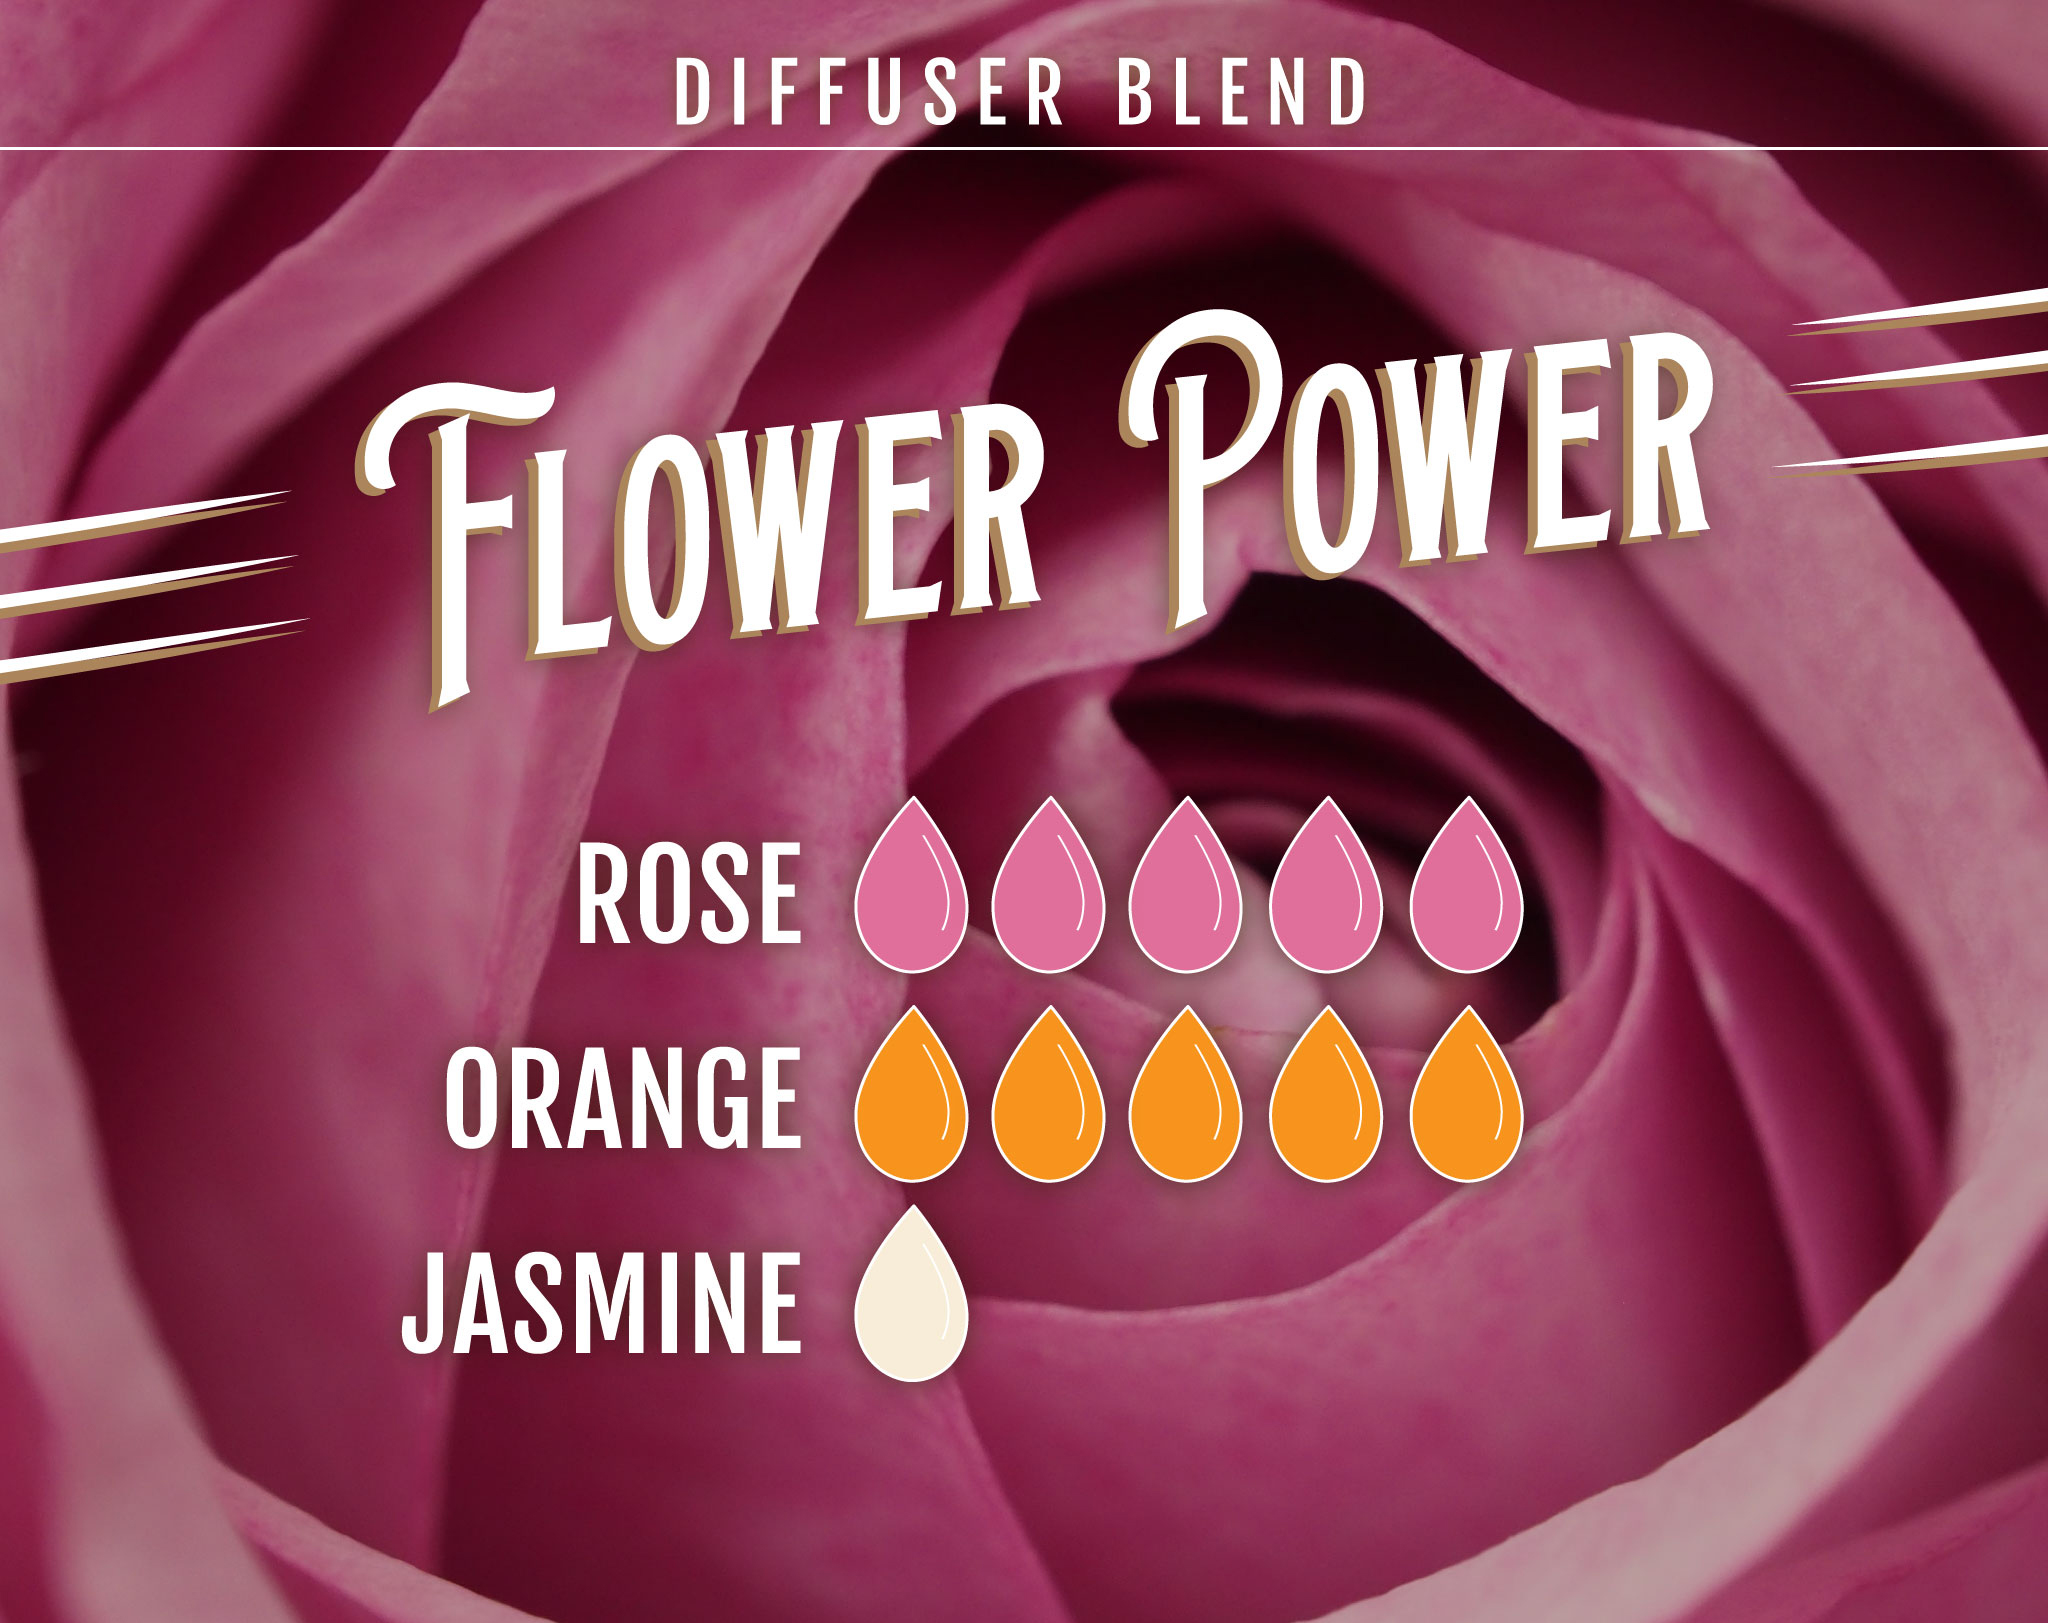 Flower Power Diffuser Blend - 5 drops of Rose Essential Oil, 5 drops of Orange Essential Oil, 1 drop of Jasmine Essential Oil